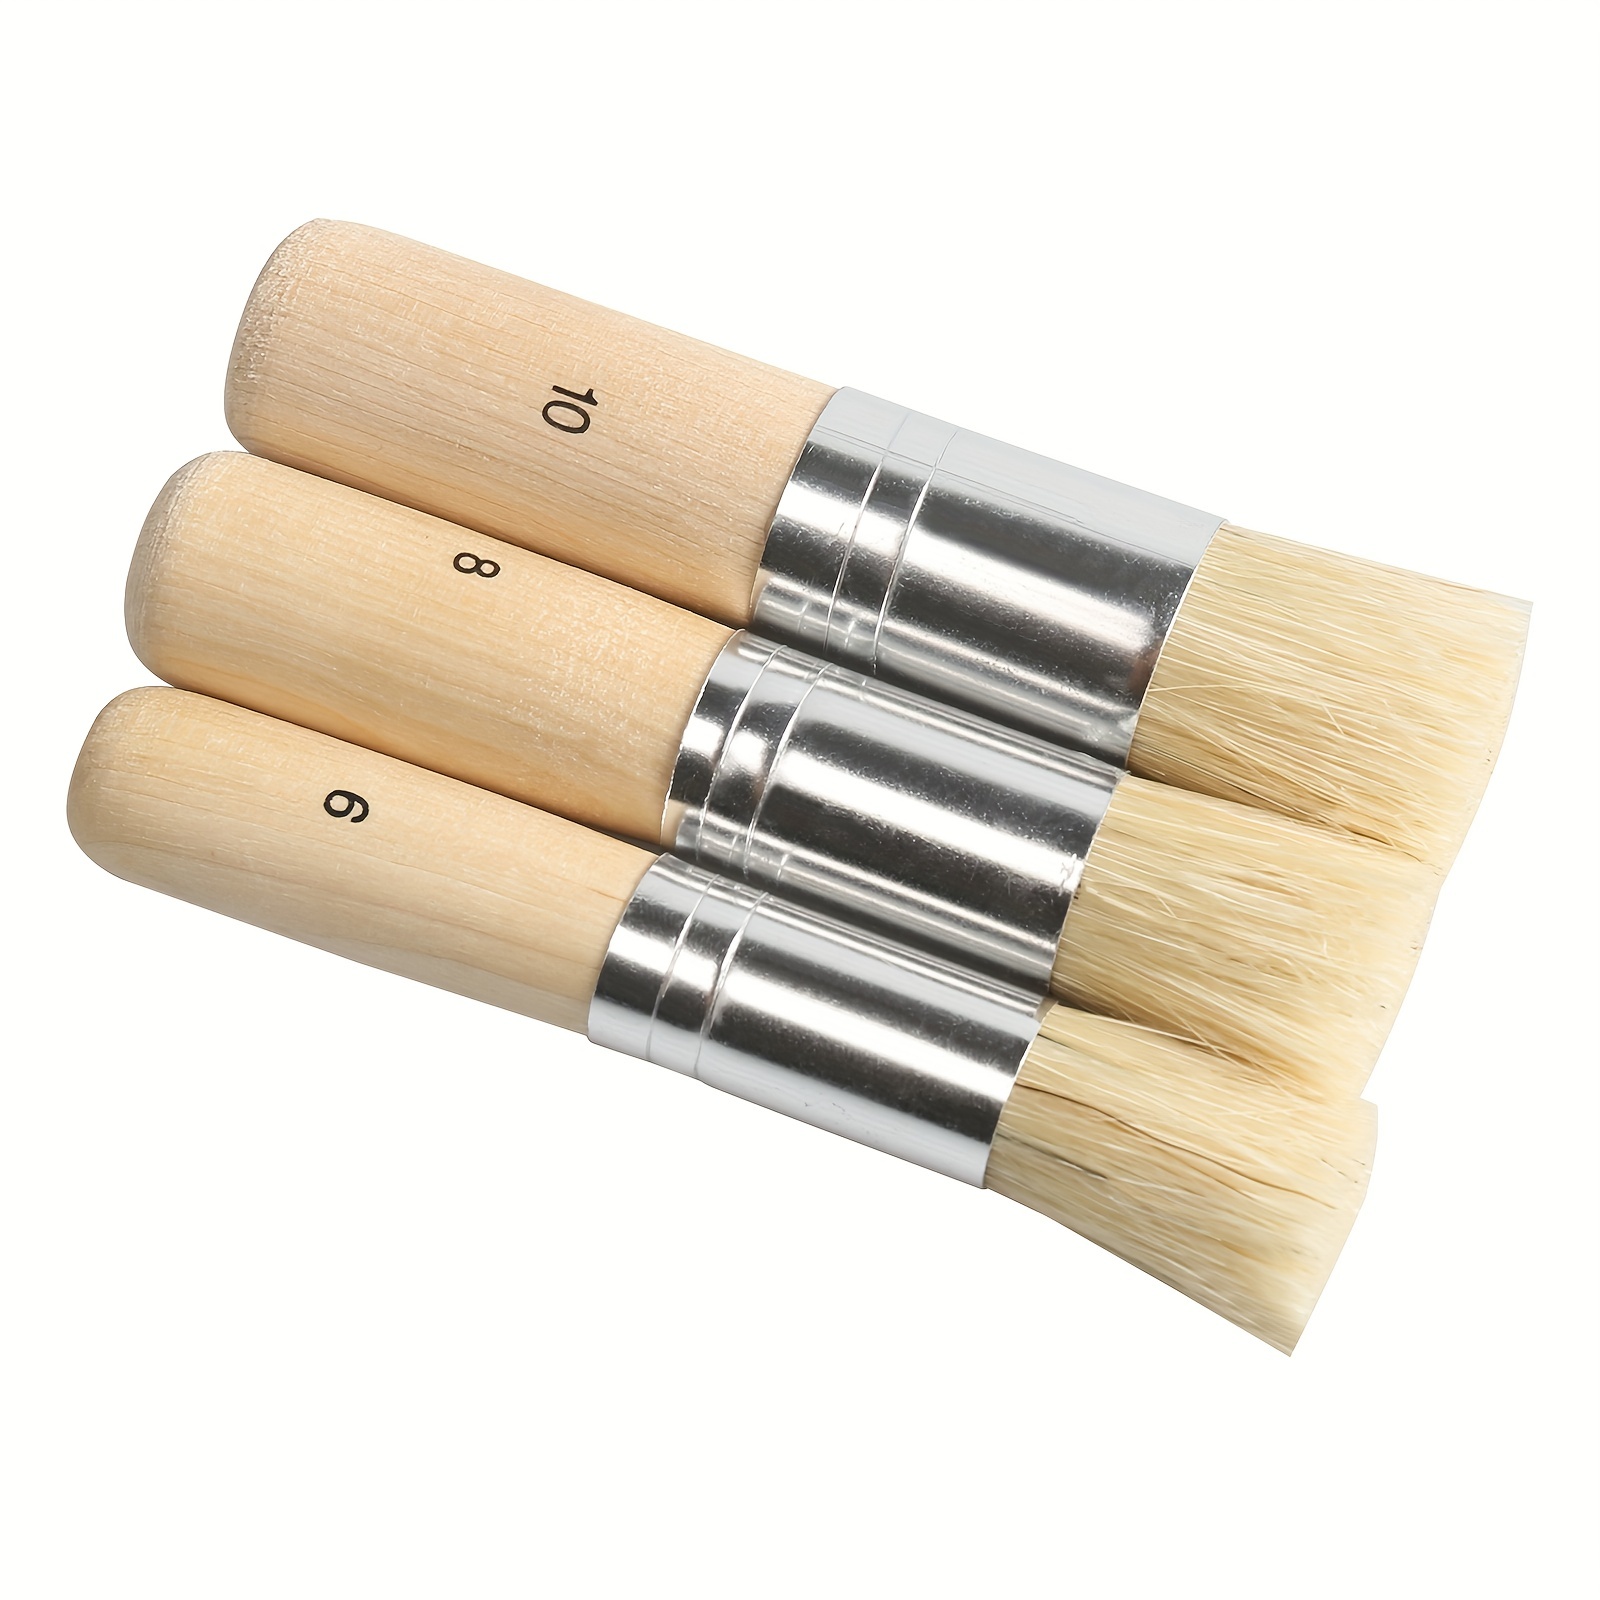  Ruwado 3 Pcs Wooden Stencil Brushes for Acrylic Paint Natural  Wood Bristle Template Brush for Oil Painting Watercolor Painting Stencil  Project DIY Art Craft Project Home Décor